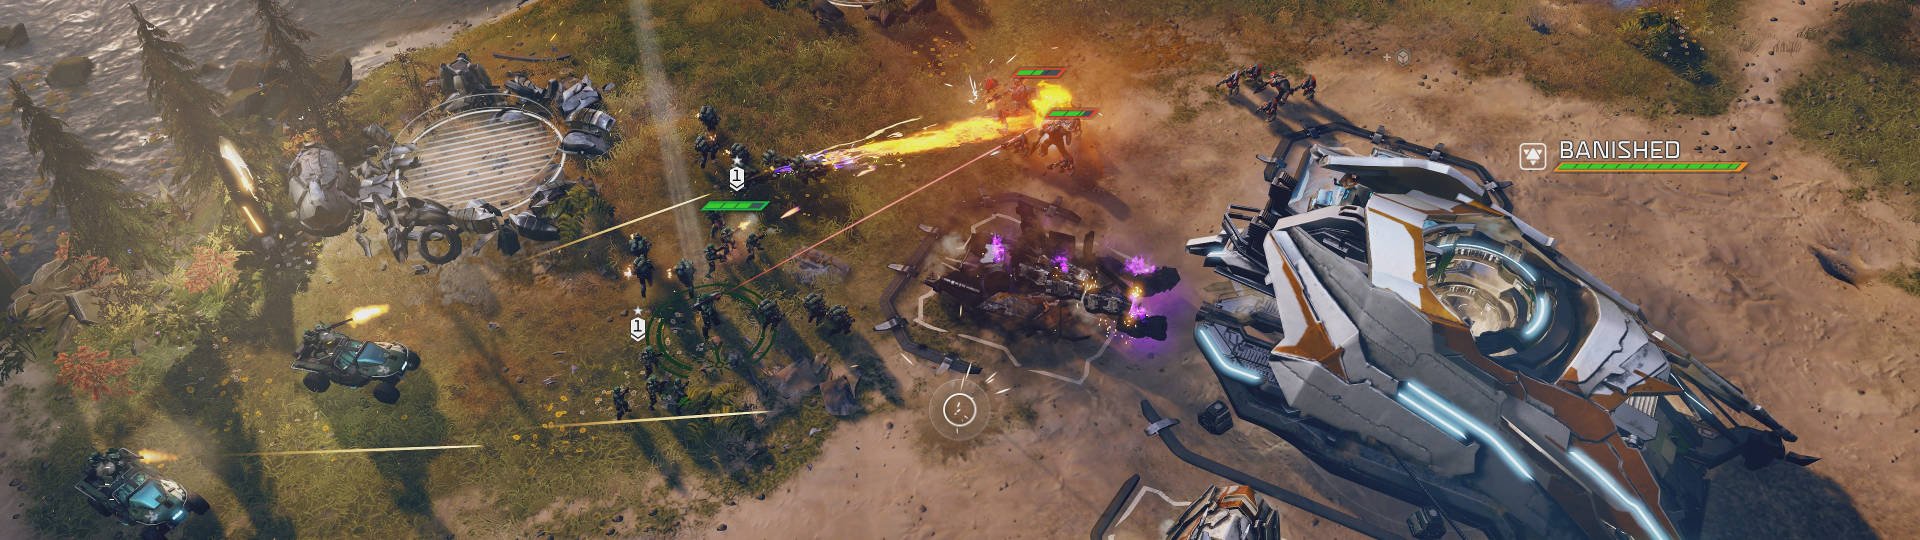 Halo 5 Halo Wars 2 Reportedly Down slice